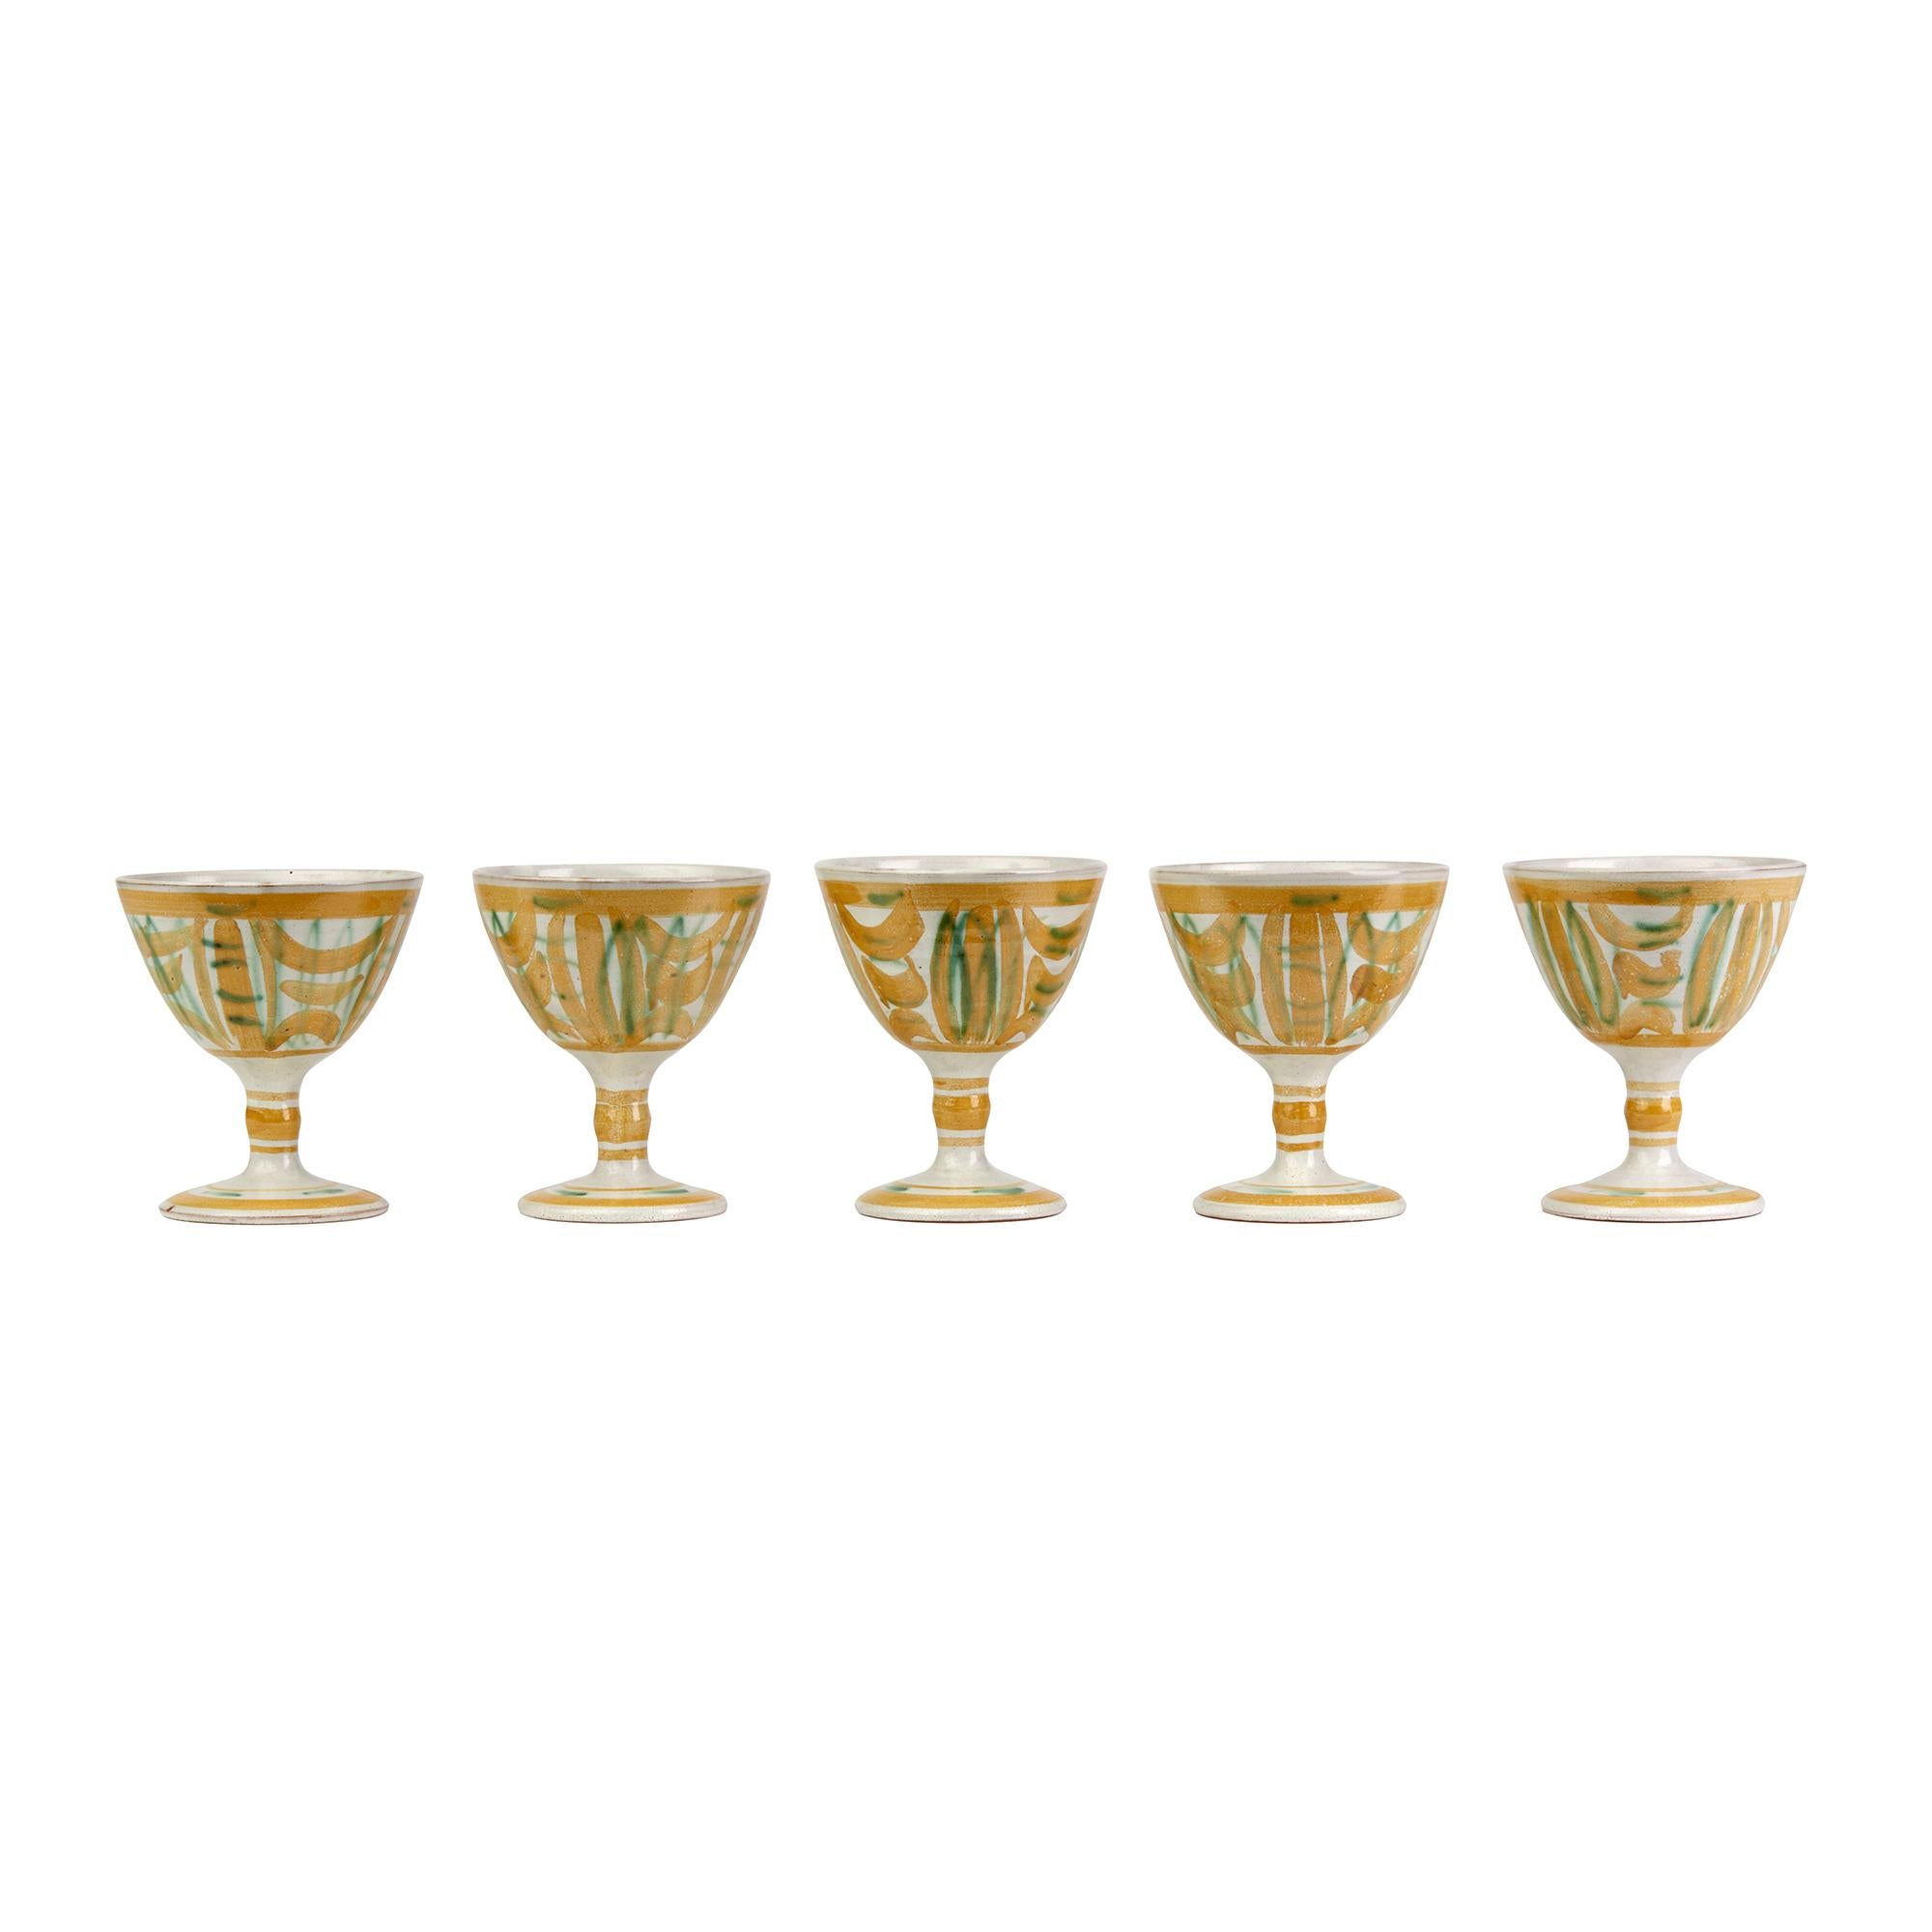 Mid-20th Century Five Alan Caiger Smith Homer Street Studio Pottery Goblets, circa 1960